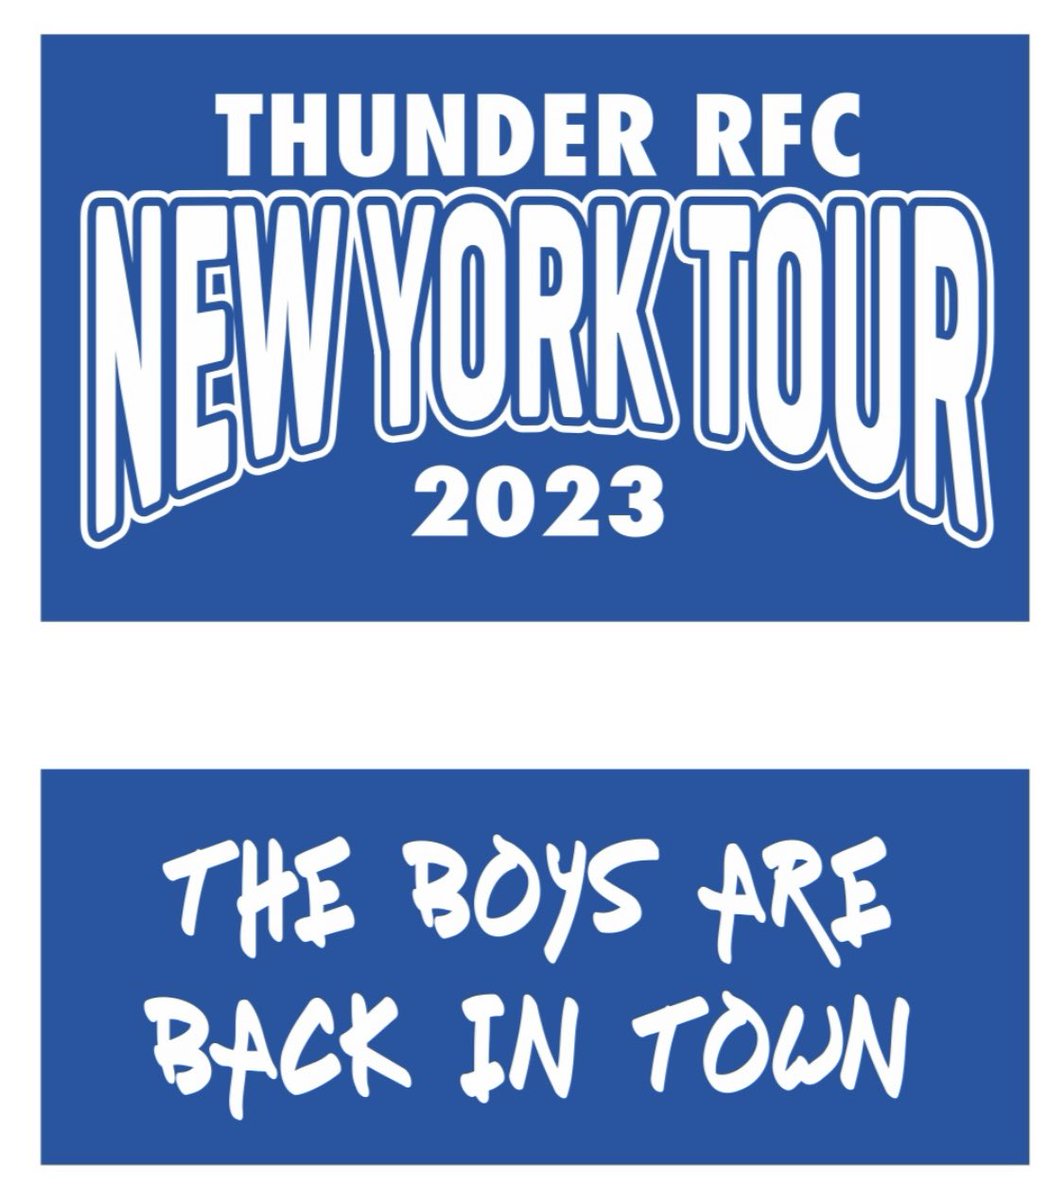 Back on Tour! Good luck Senior Boys Rugby who head down to NYC today for a long awaited return Rugby Tour! #NYCtour2023